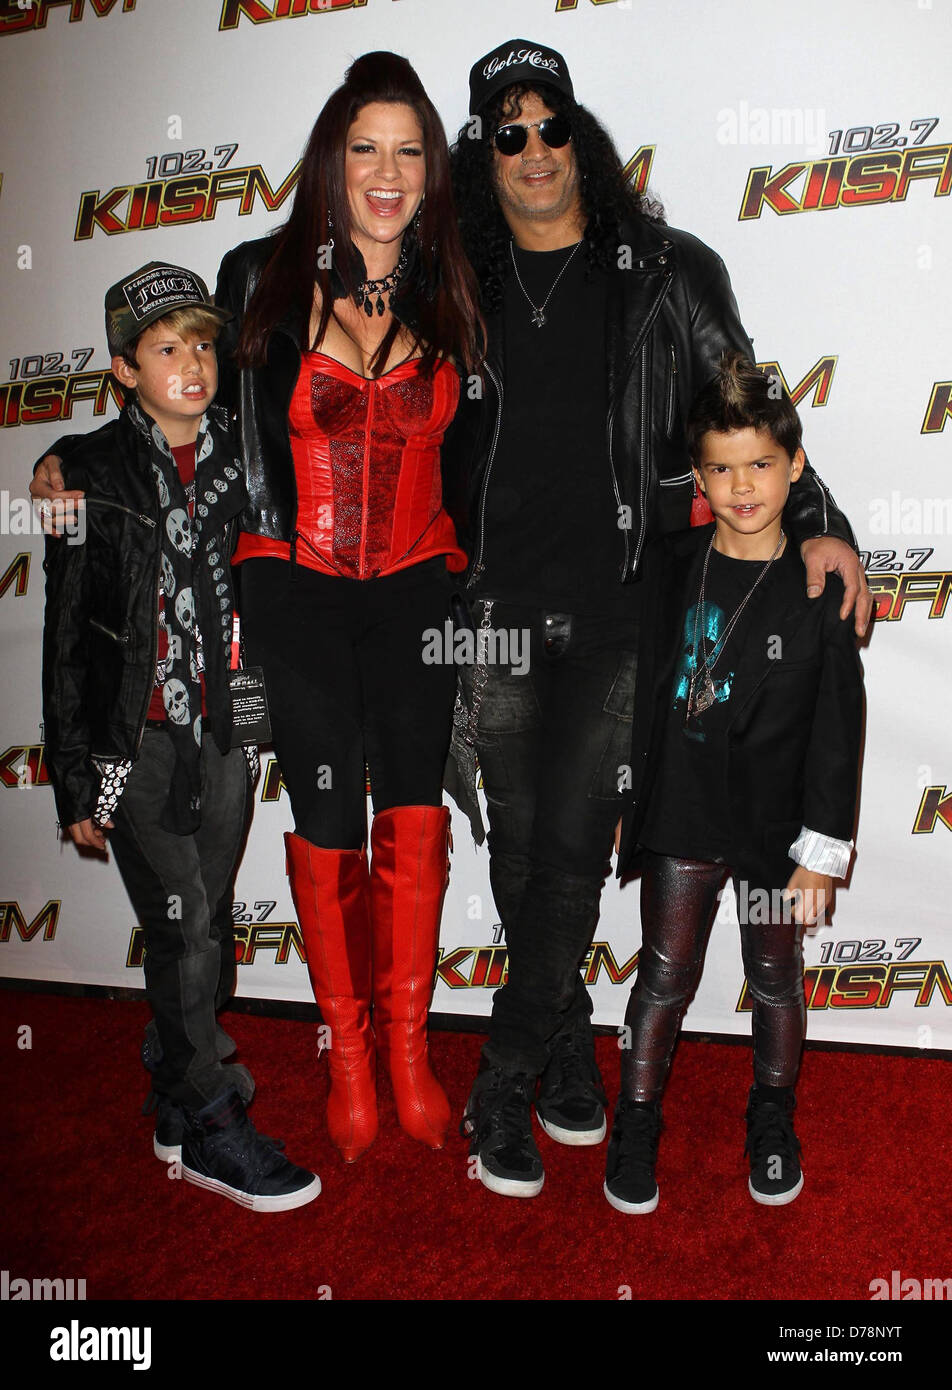 Slash & Perla Hudson with their Sons 102.7 KIIS FM's Jingle Ball - Arrivals  held at Nokia Theatre L.A. Live Los Angeles Stock Photo - Alamy